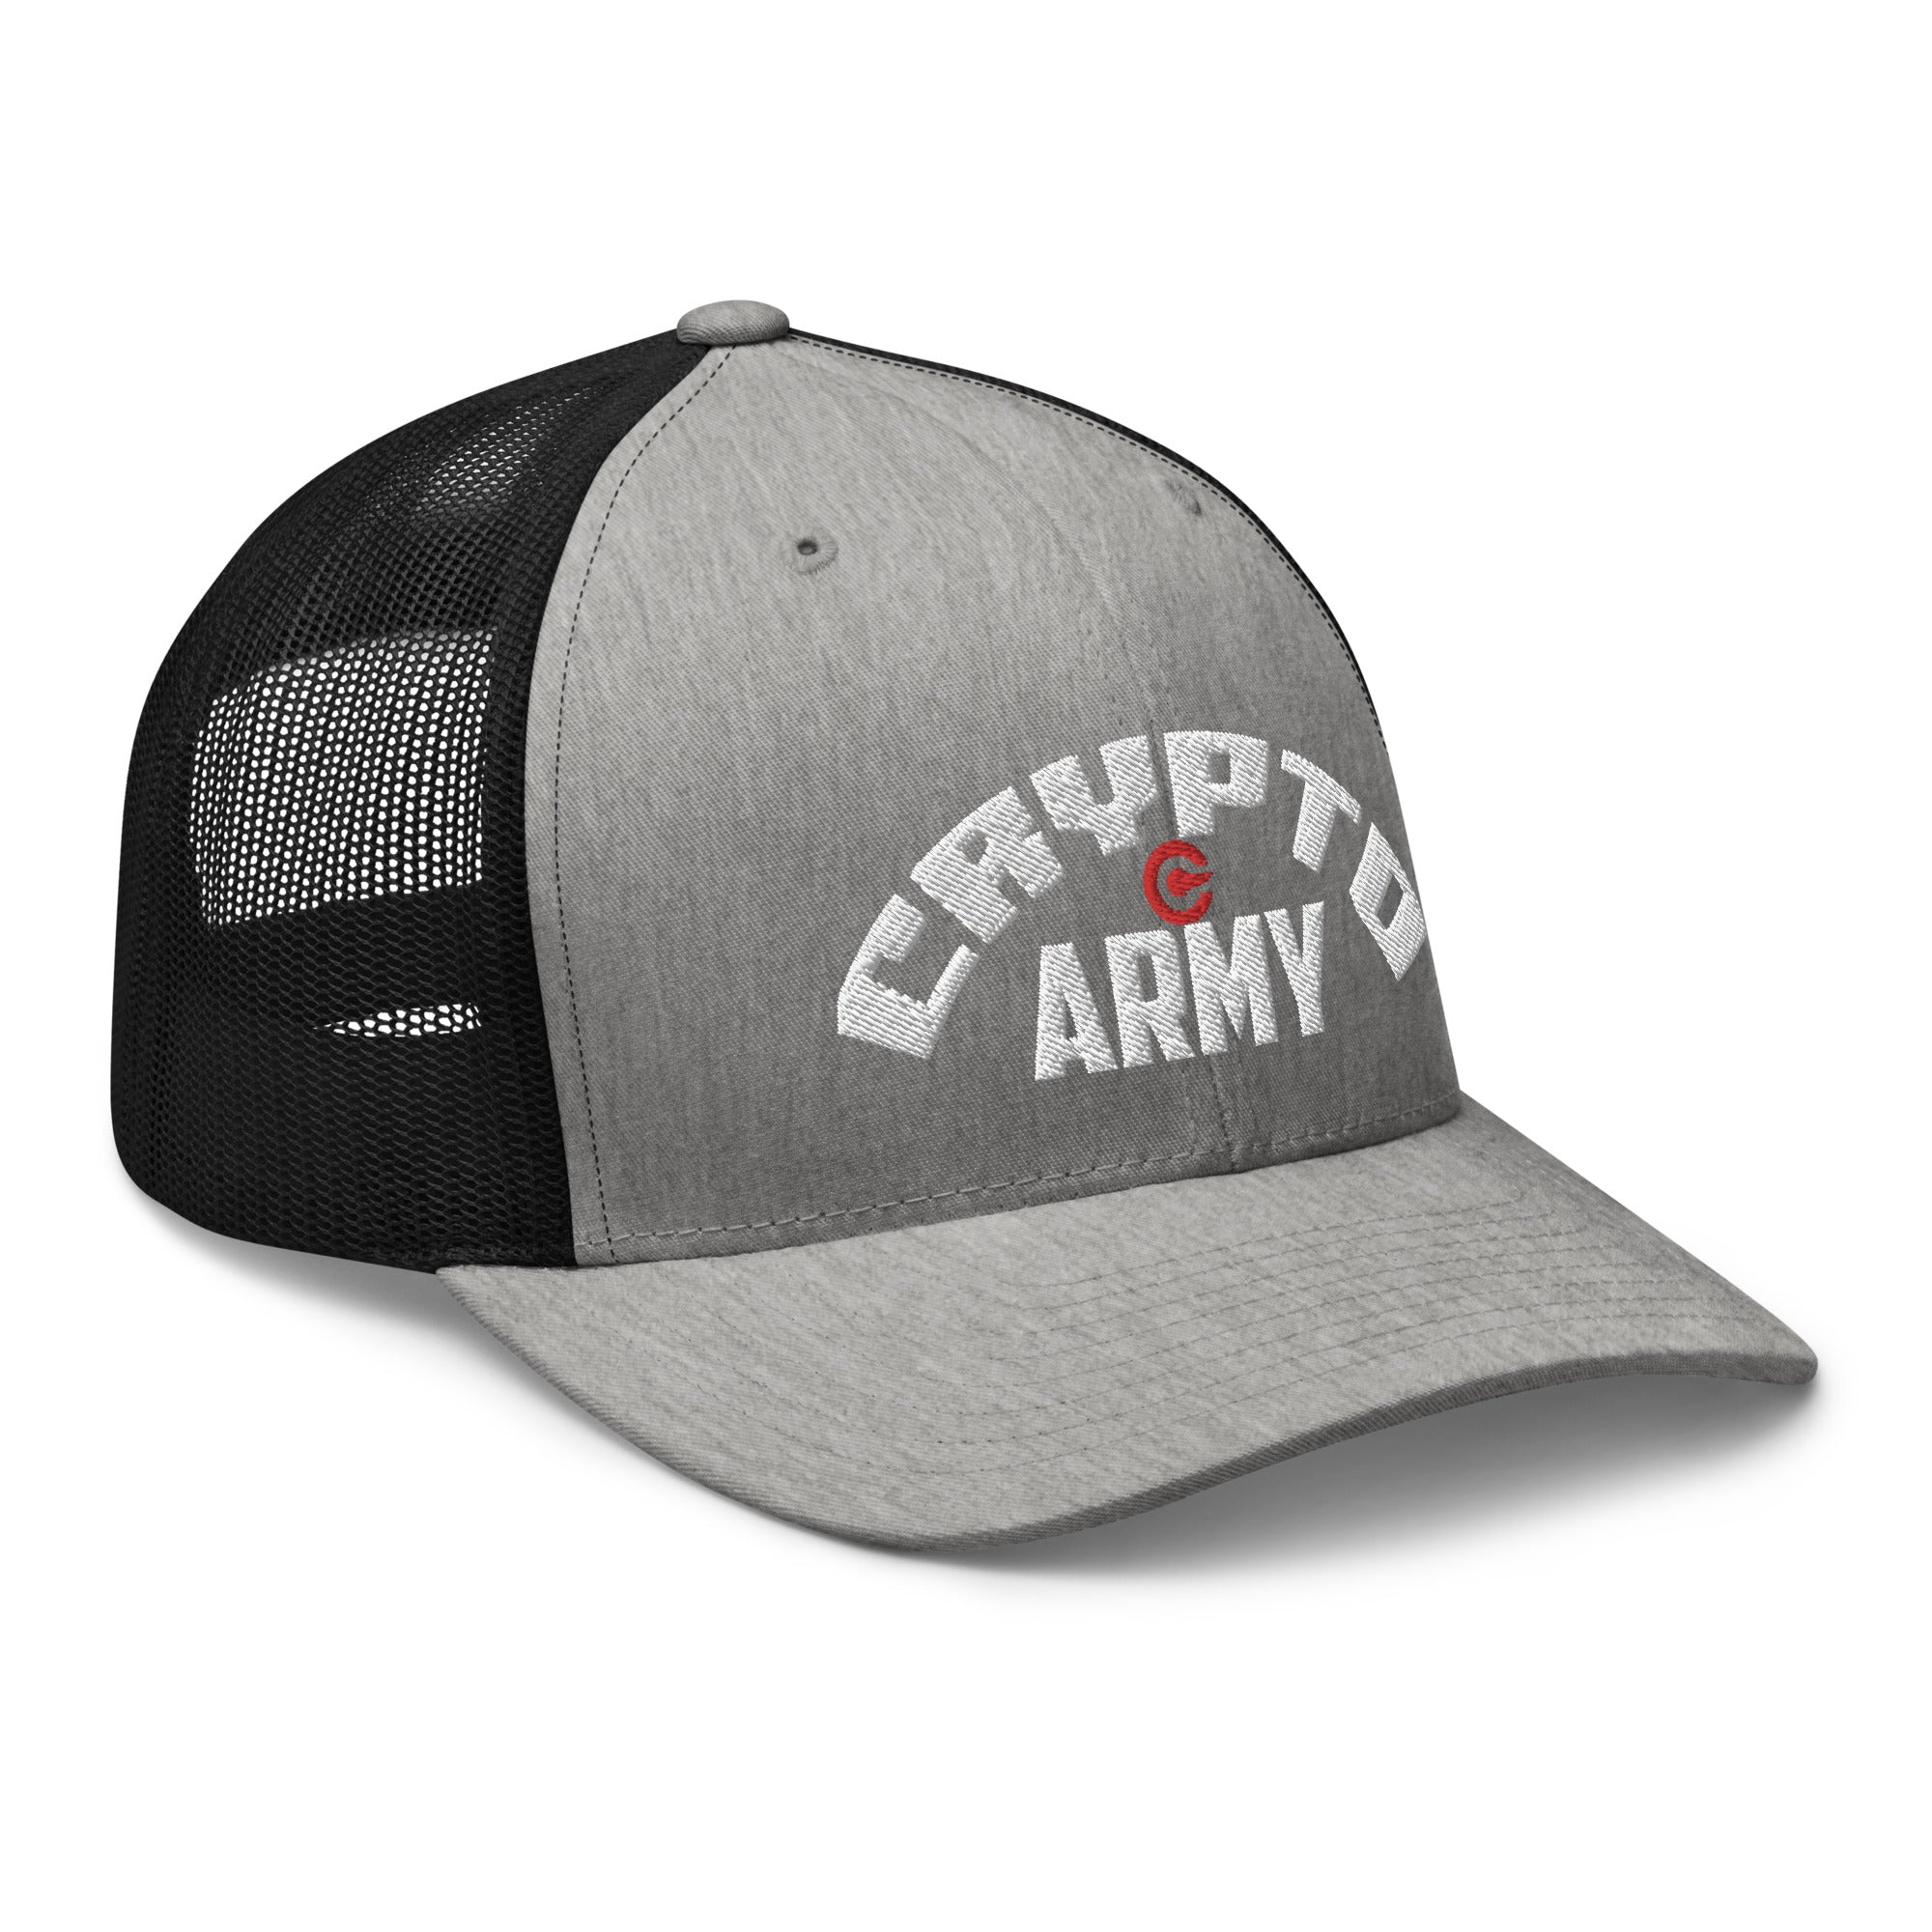 Crypto Army Curved Cryptocurrency Symbol Trucker Cap Snapback Hat